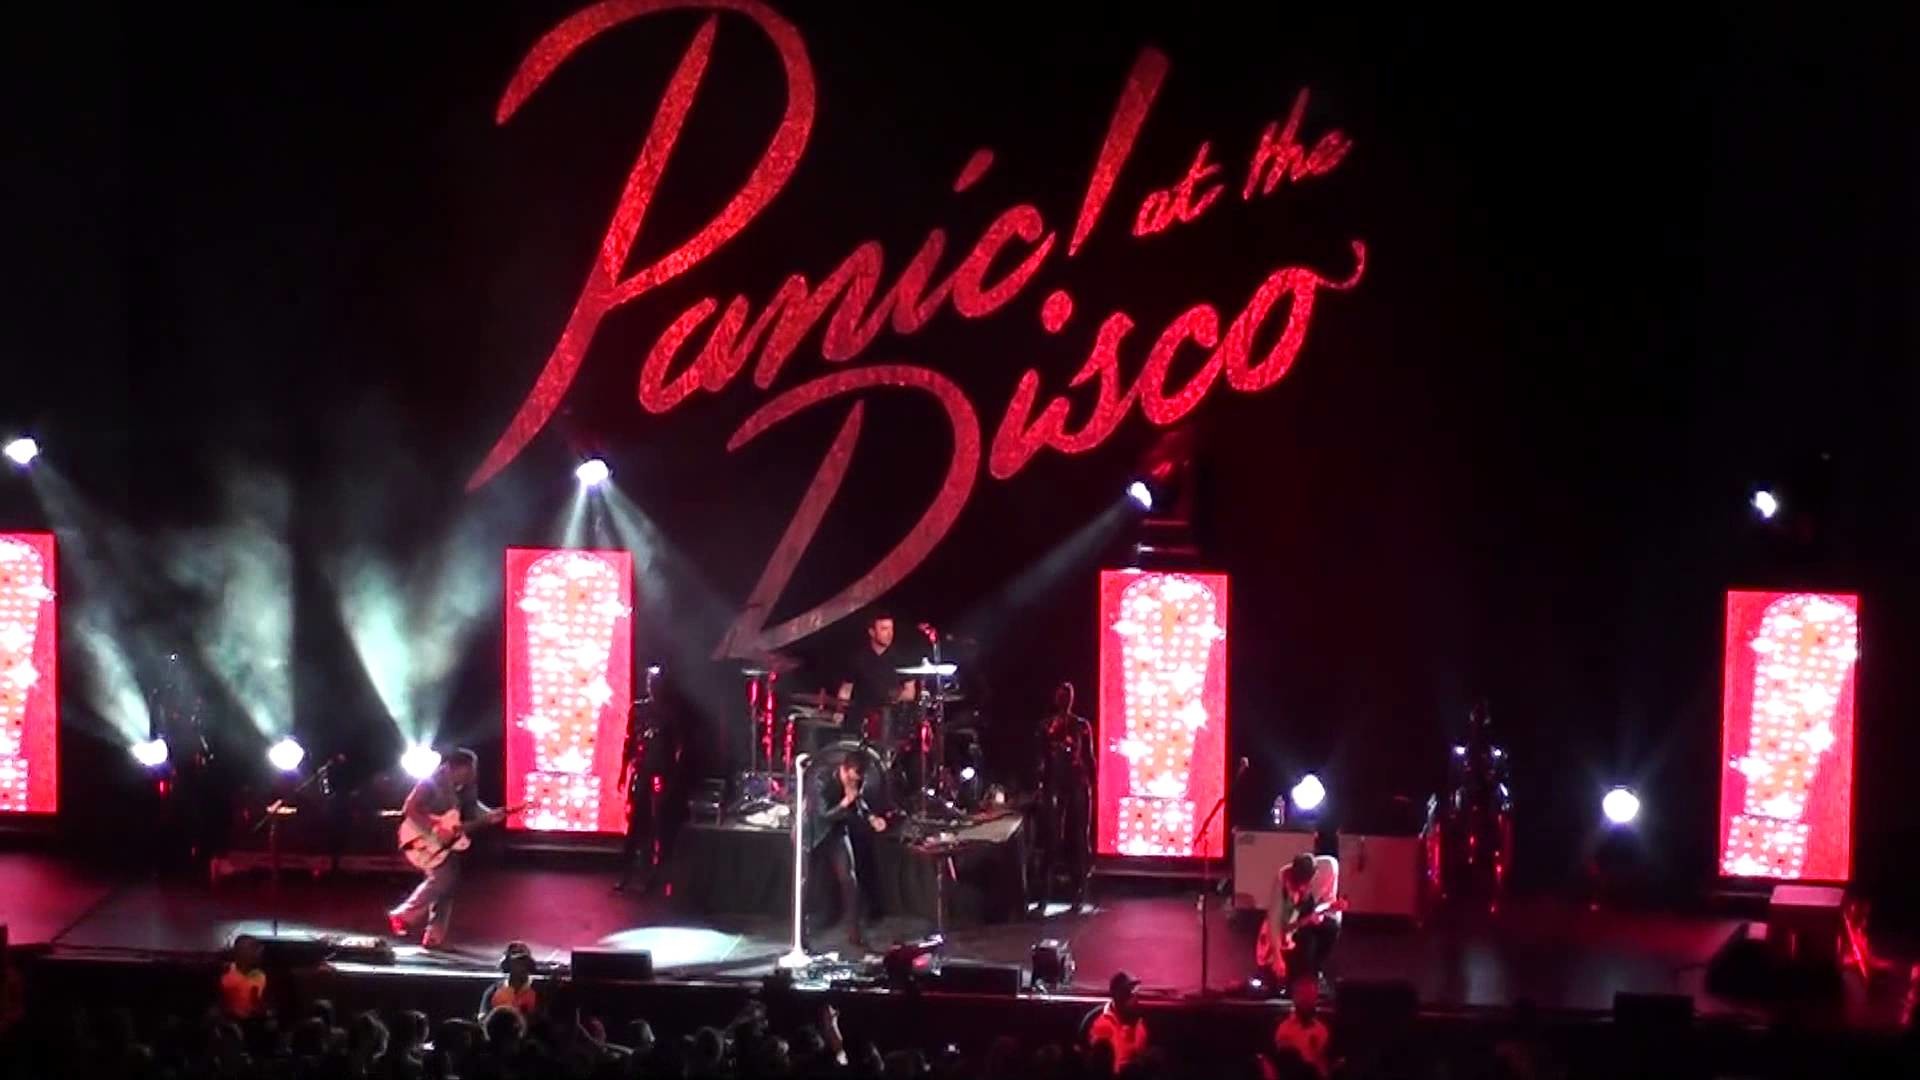 panic at the disco wallpaper,performance,entertainment,rock concert,stage,concert